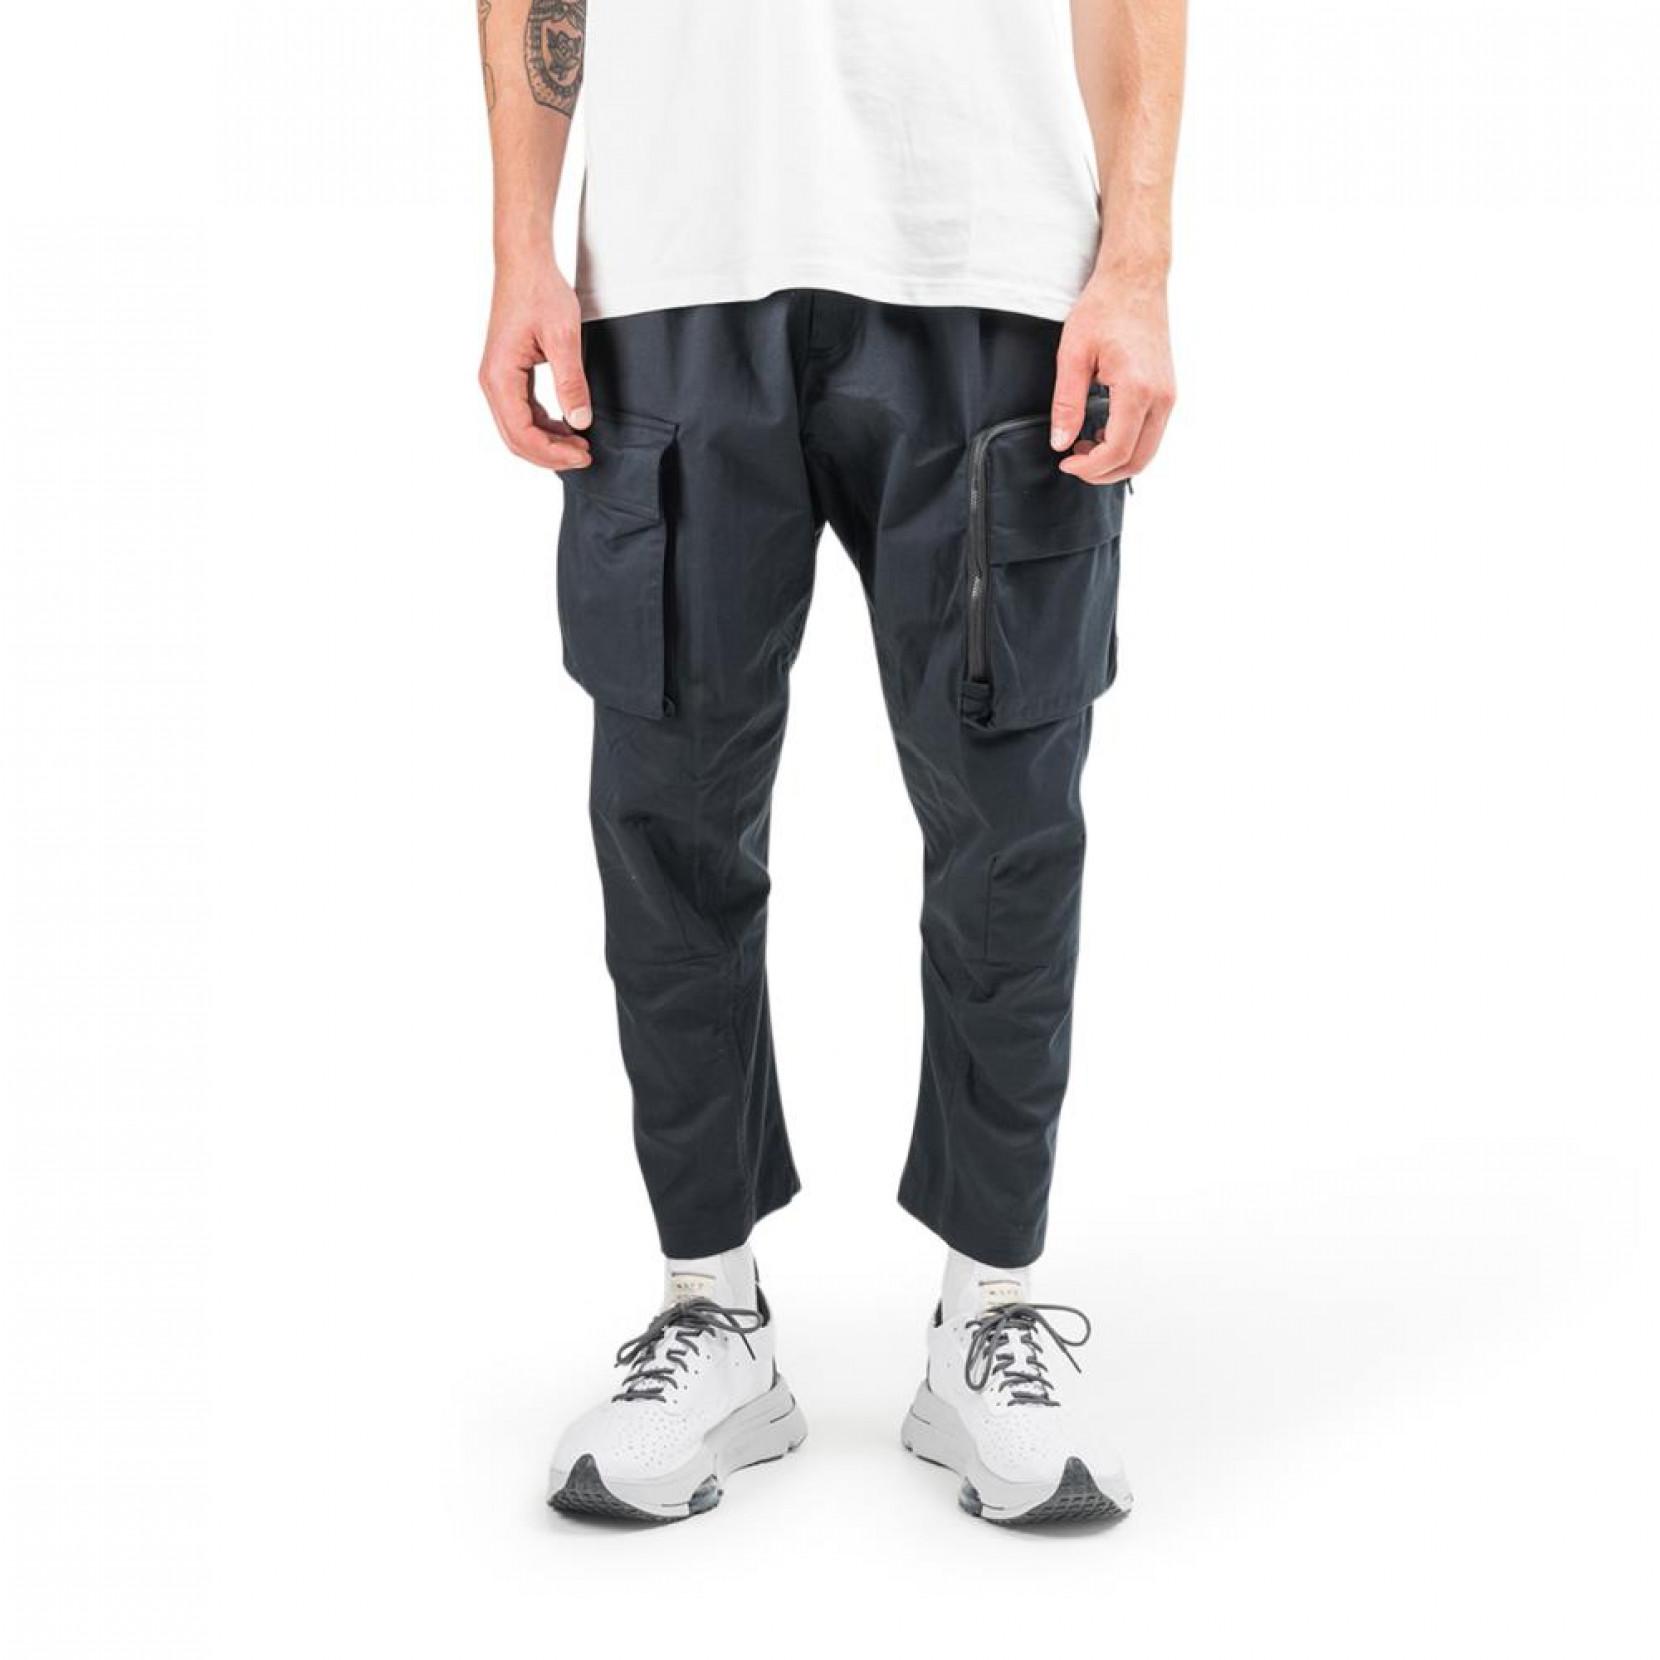 Nike Cotton Acg Woven Cargo Pant in Black for Men - Lyst